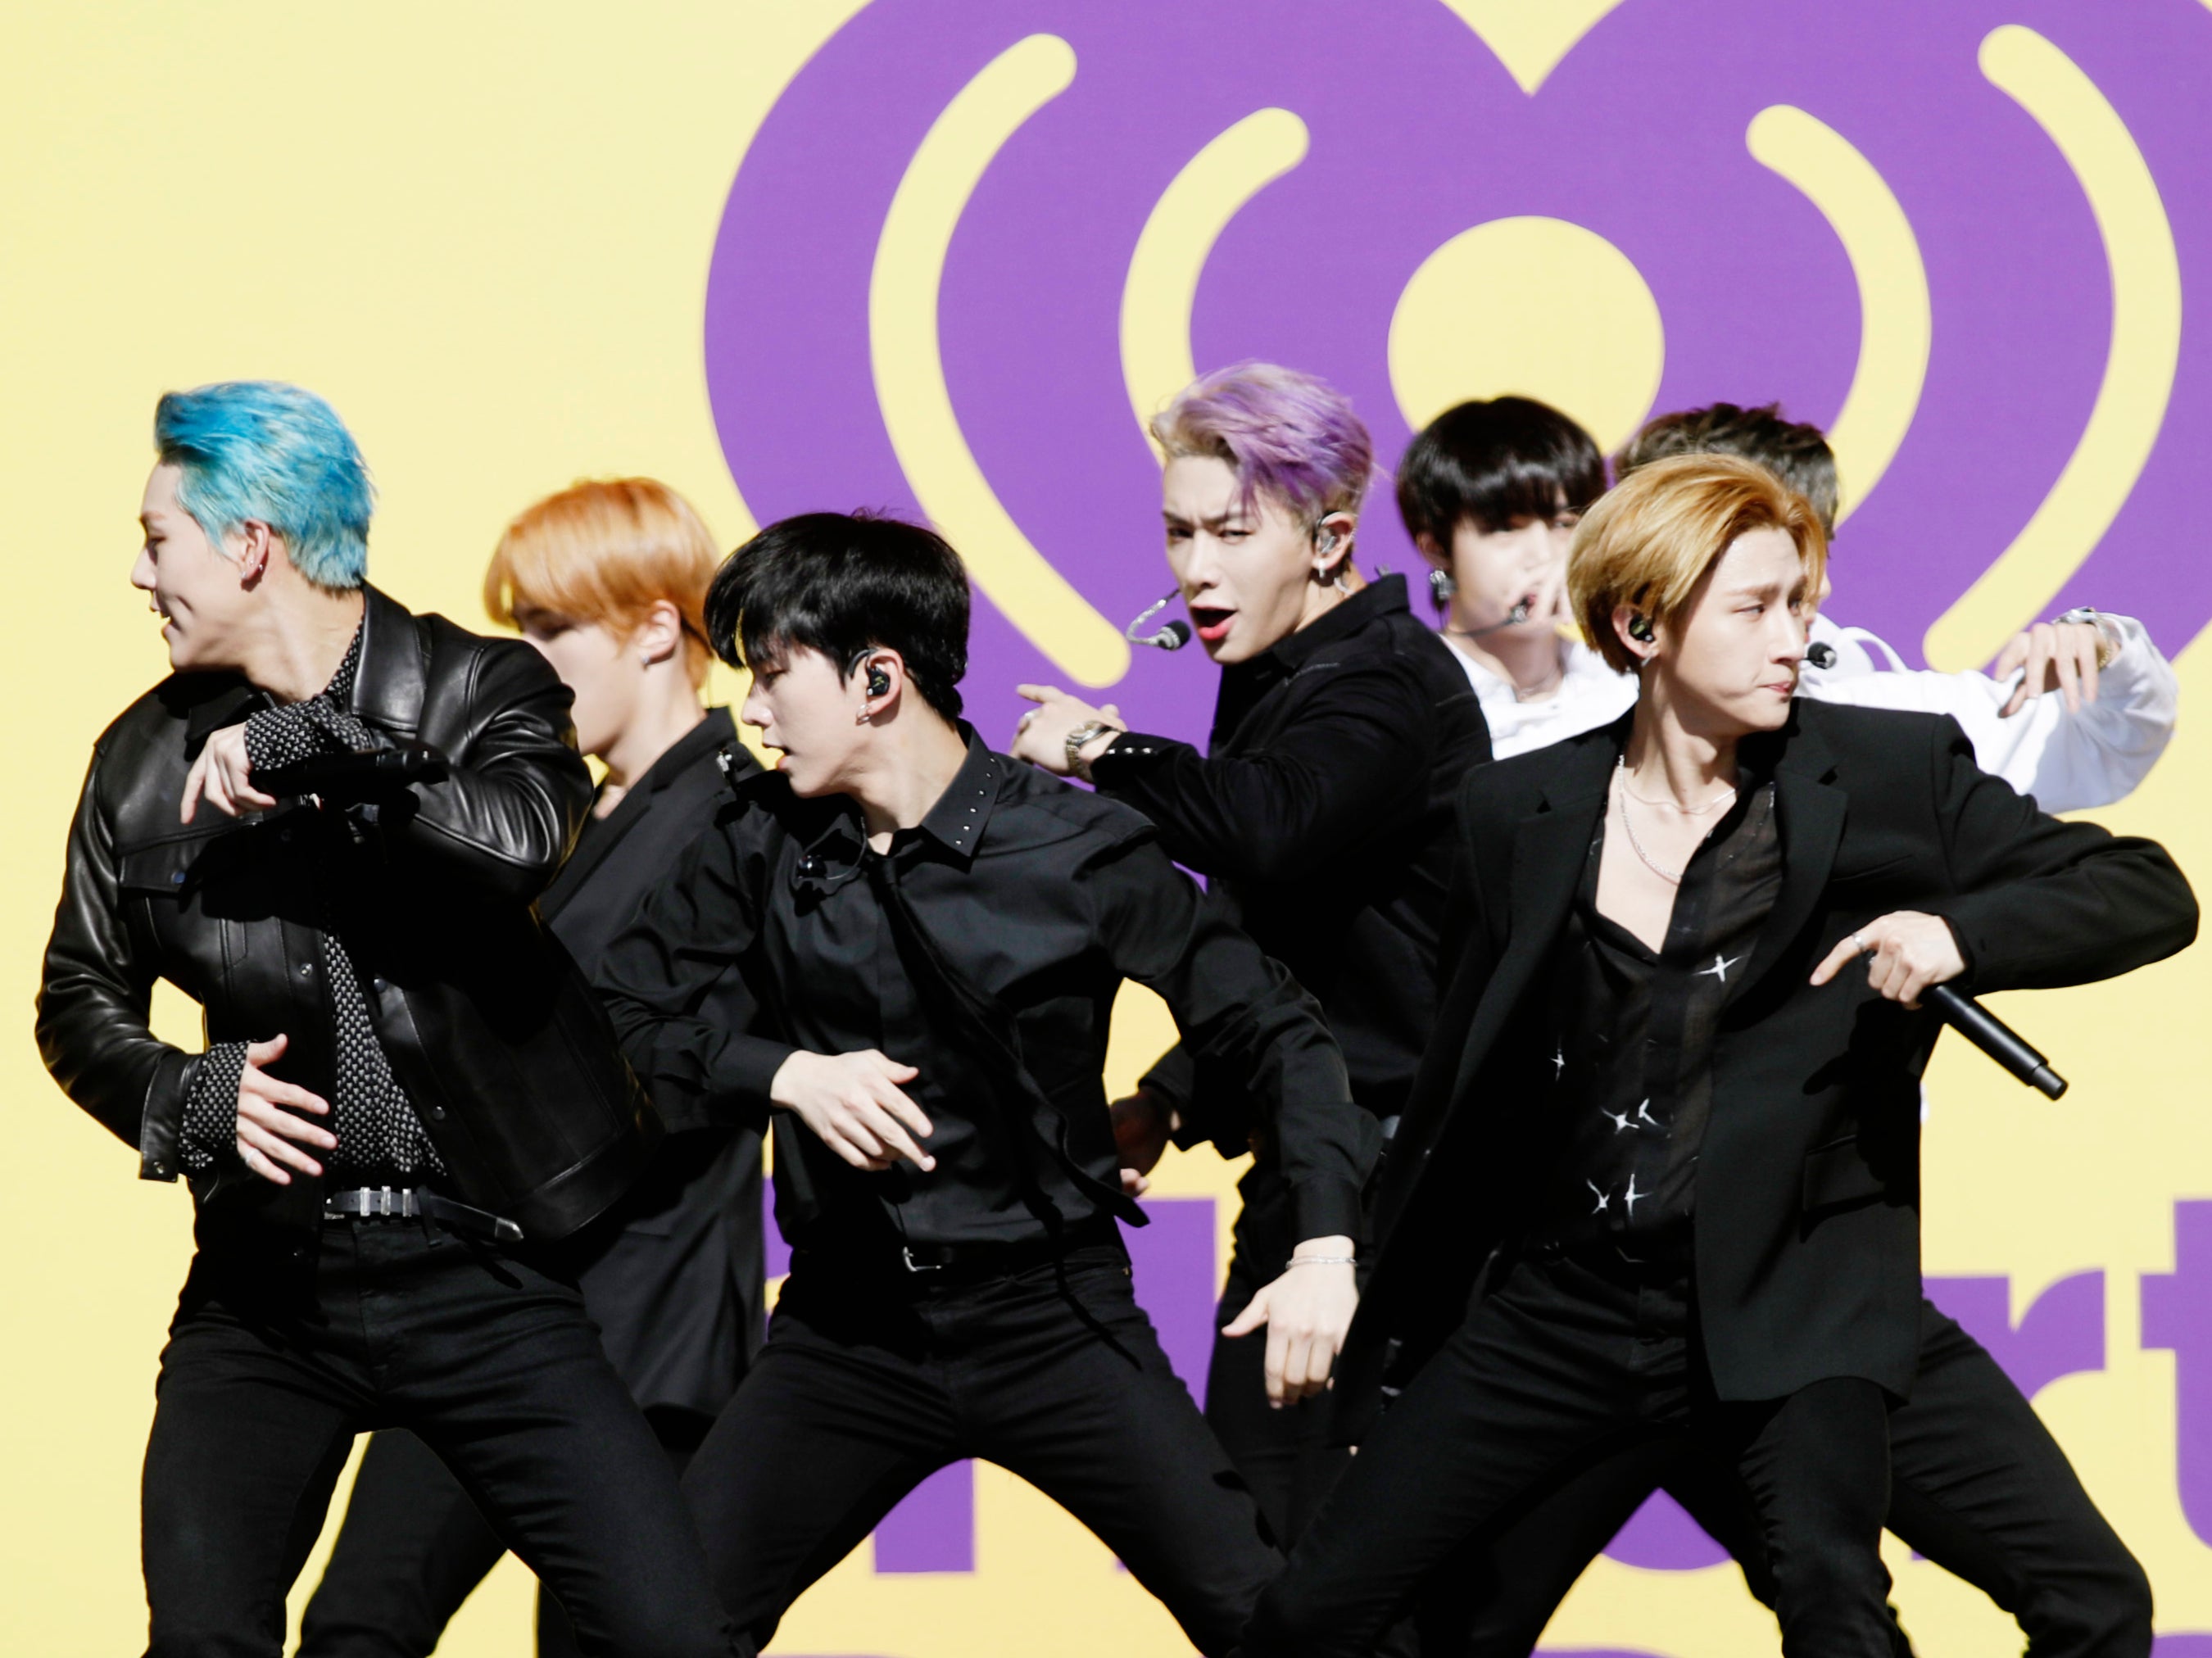 K-pop group Monsta X perform onstage at the 2019 iHeartRadio festival in Las Vegas